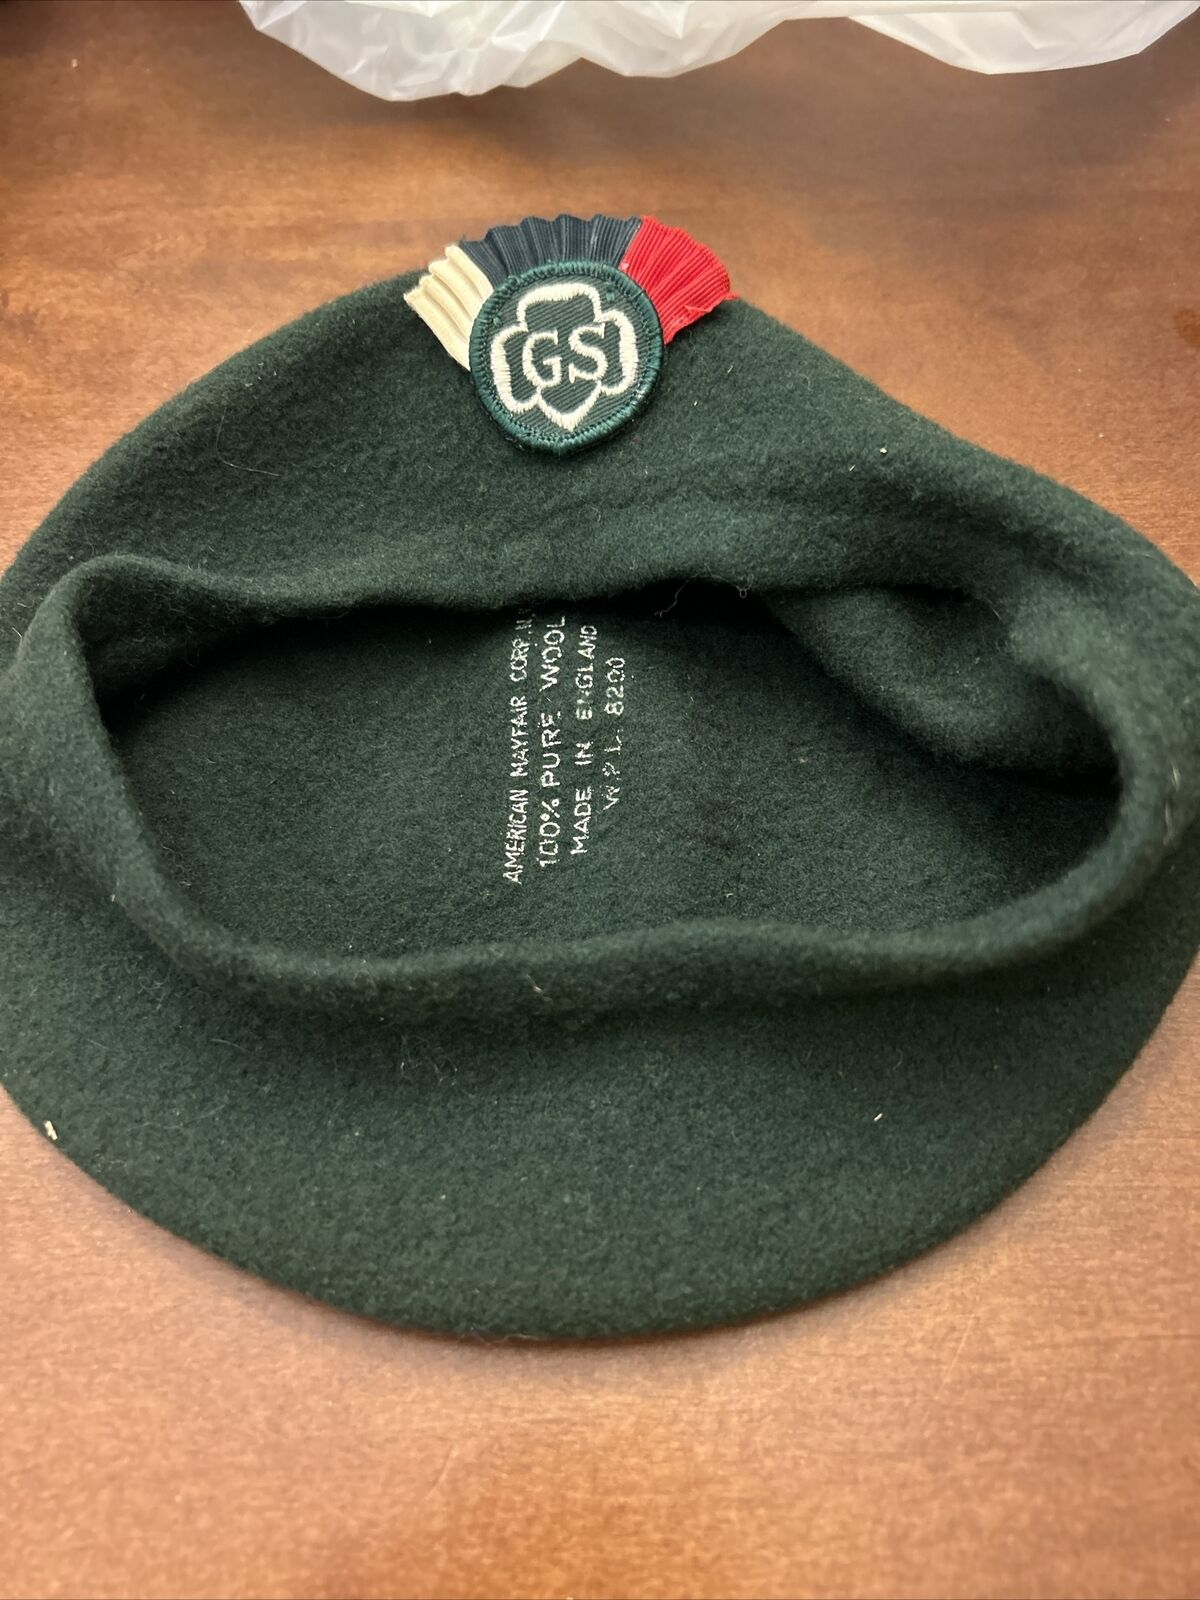 Vintage Wool Girl Scouts Uniform Hat Made in England Unique Patch